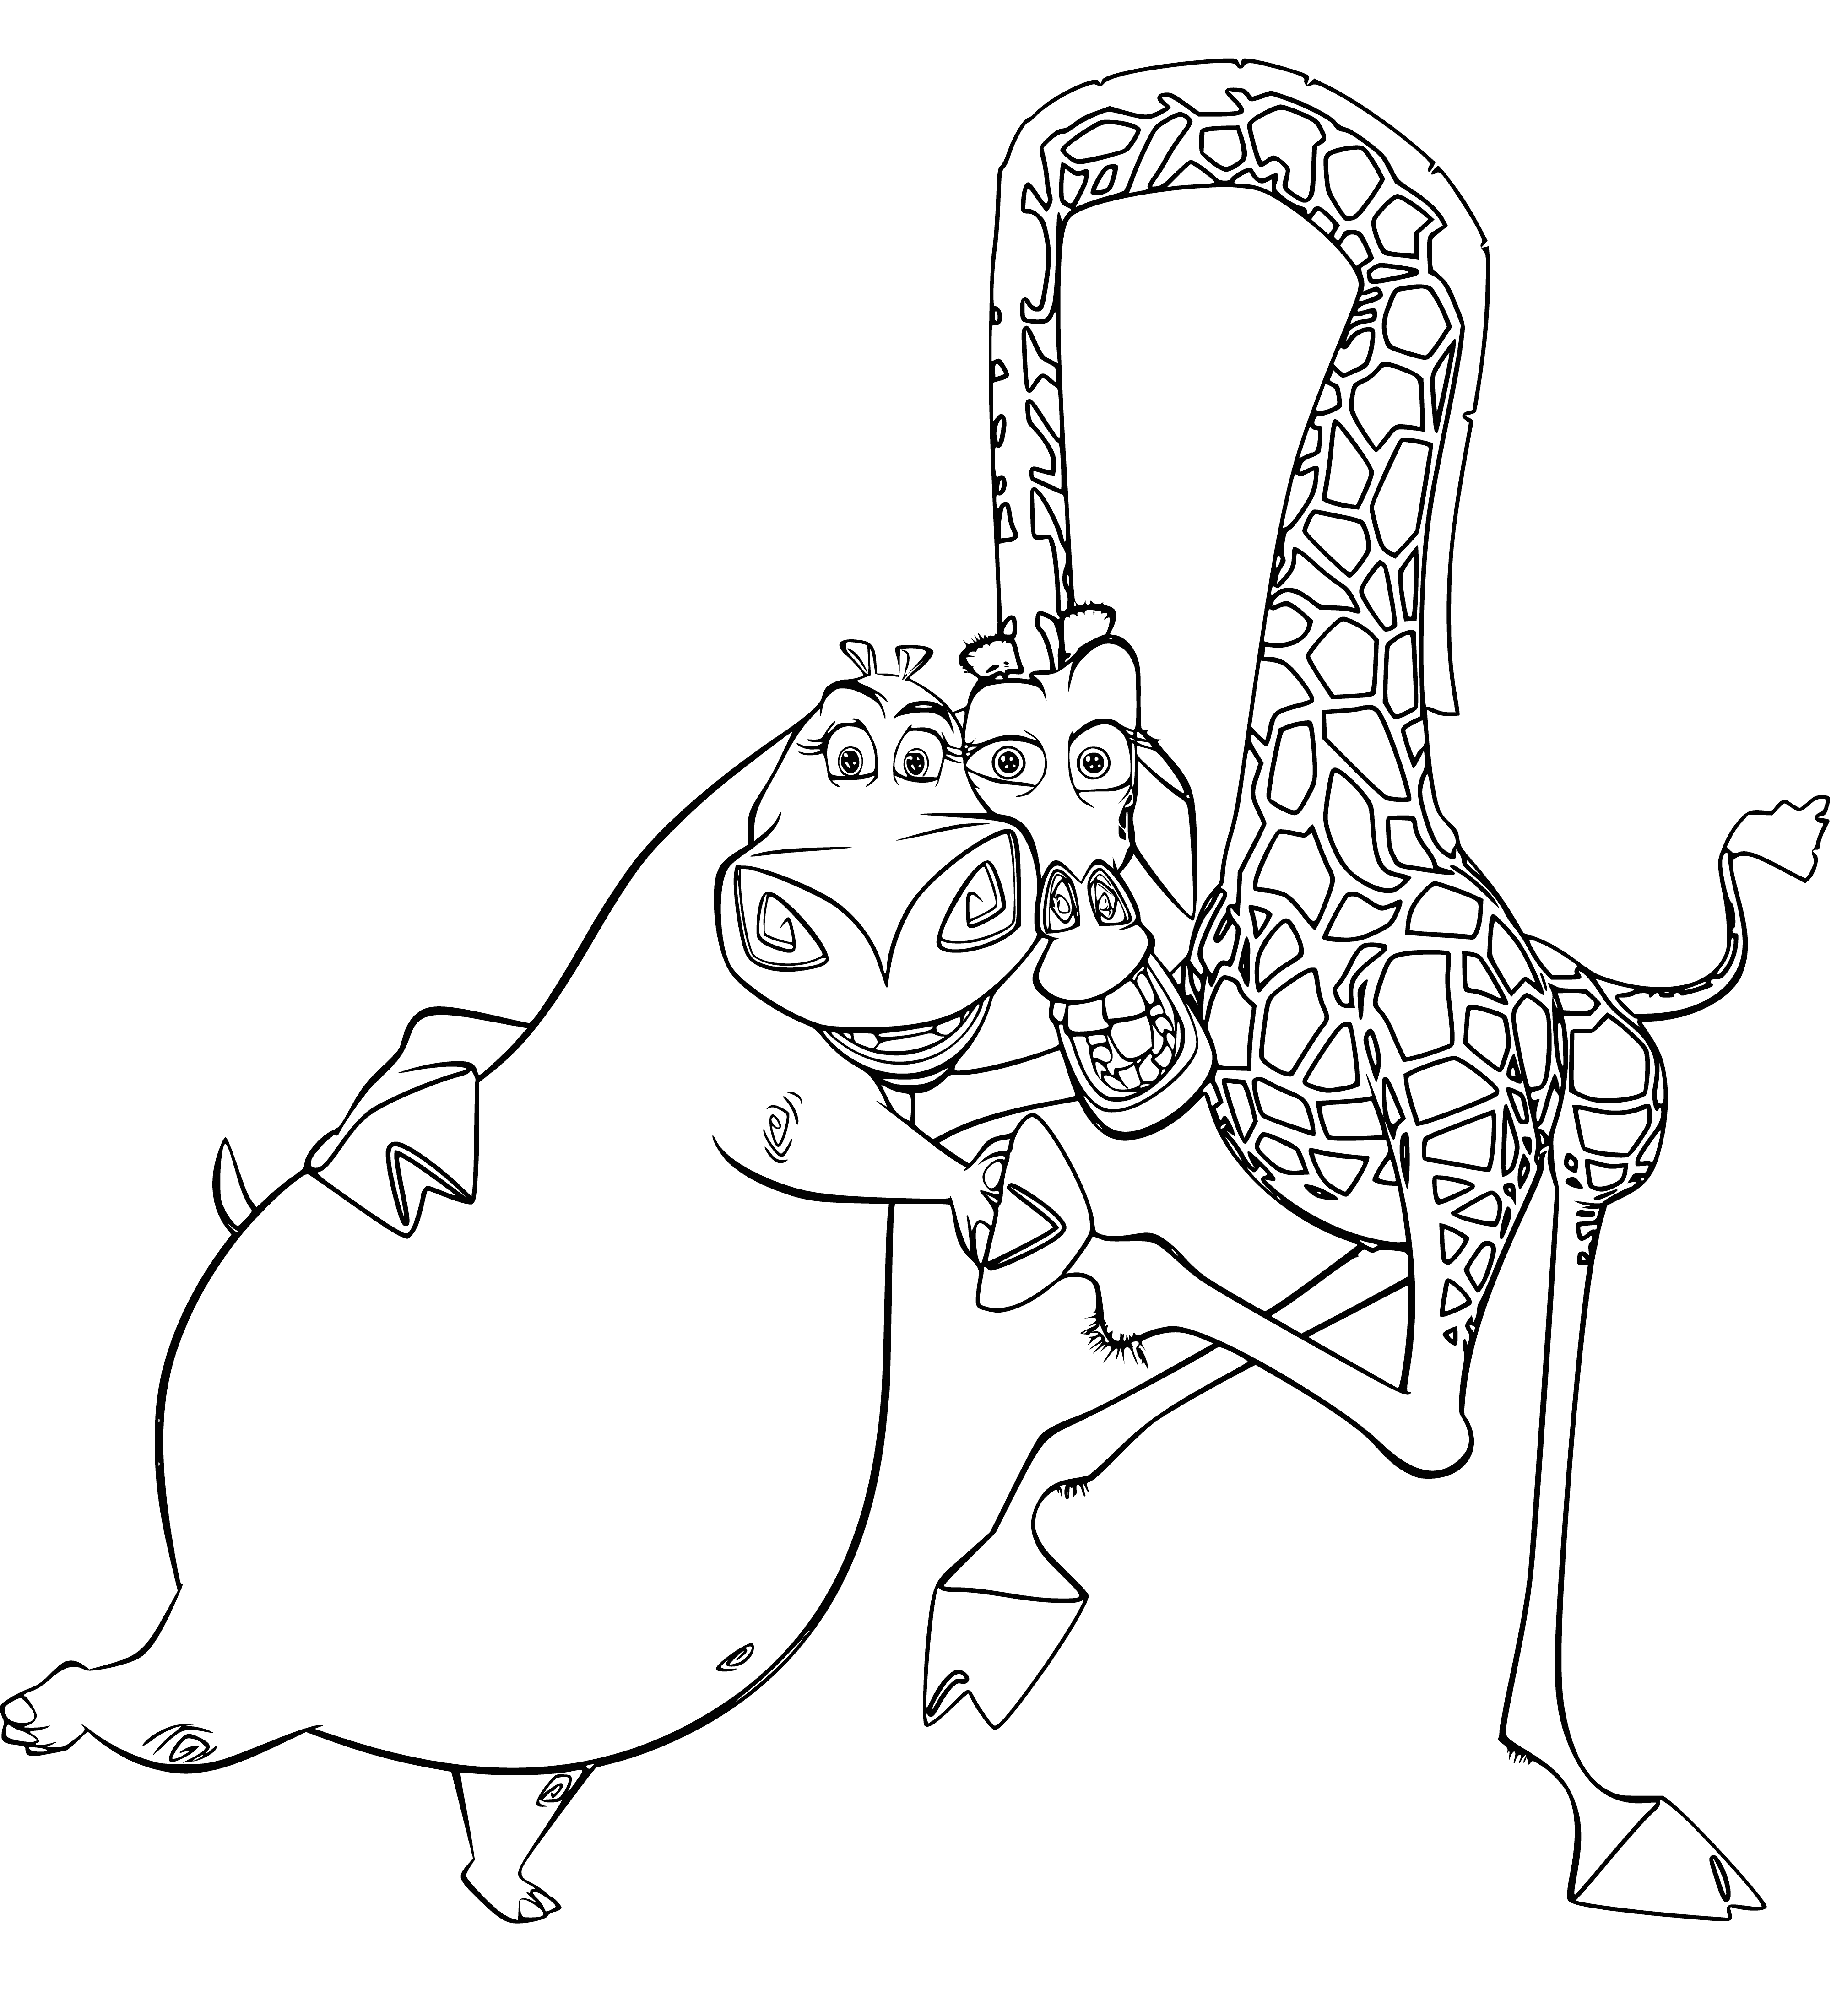 coloring page: Two animals, one threatening, one scared; in the world of Madagascar.